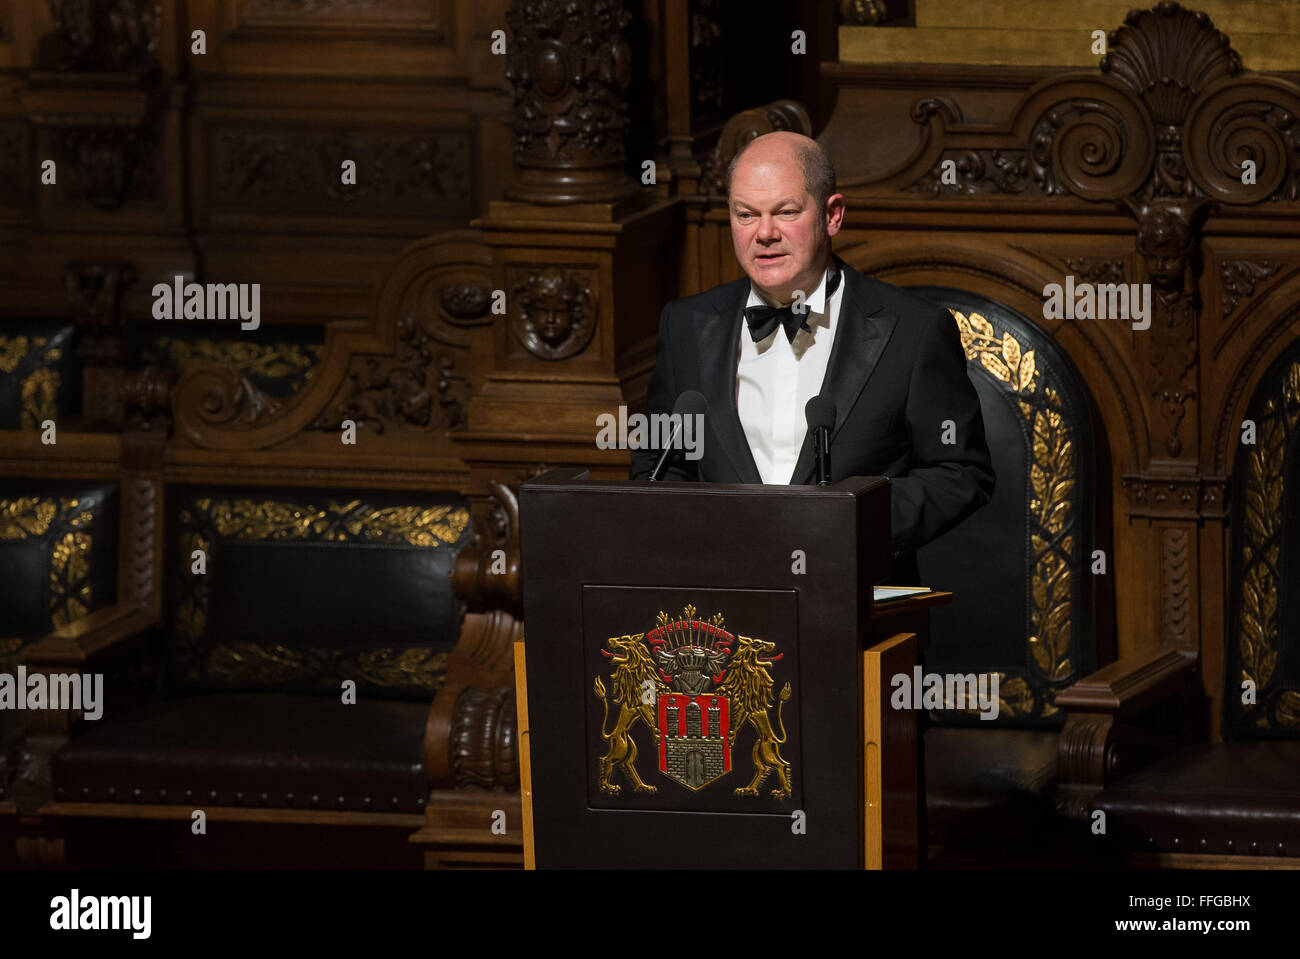 Hamburg, Germany. 12th Feb, 2016. Hamburg's governing mayor Olaf Scholz delivers a speech at the Matthiae dinner at the city hall of Hamburg, Germany, 12 February 2016. Britain's Prime Minister David Cameron and German Chancellor Angela Merkel are guests of honour at the oldest feast in the world. Since 1356, the leaders of the Hansa city invite distinguished guests to the Matthiae dinner. Photo: LUKAS SCHULZE/dpa/Alamy Live News Stock Photo